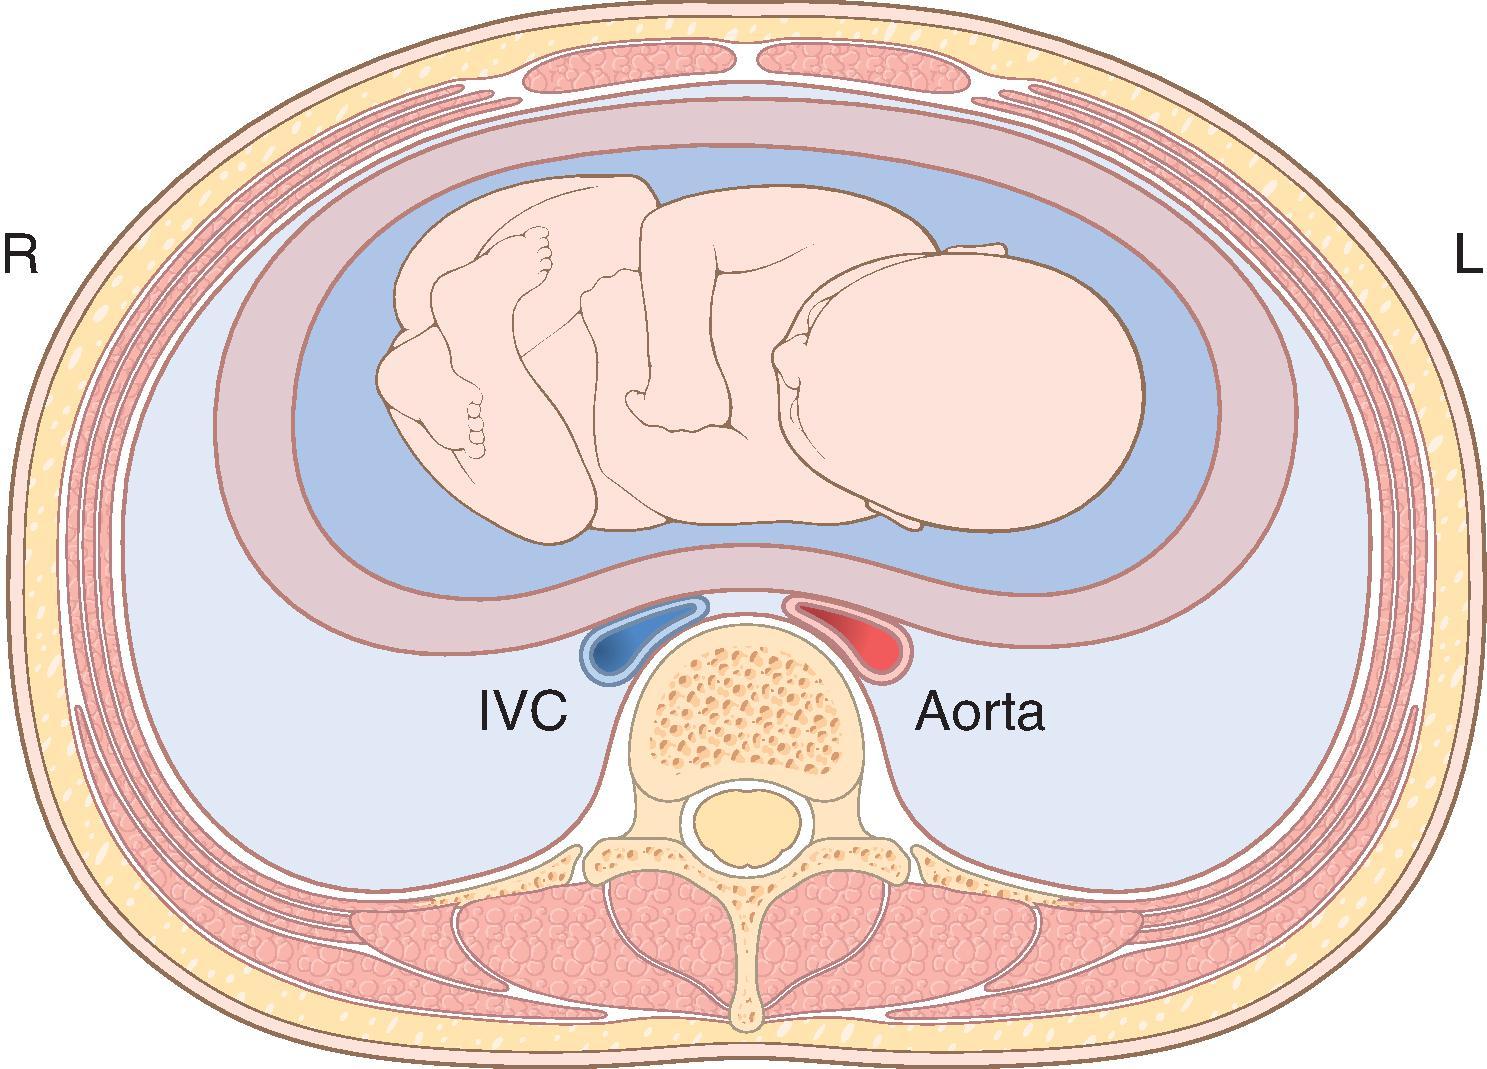 Fig. 33.1, Schematic diagram showing compression of the inferior vena cava (IVC) and abdominal aorta by the gravid uterus in the supine position.